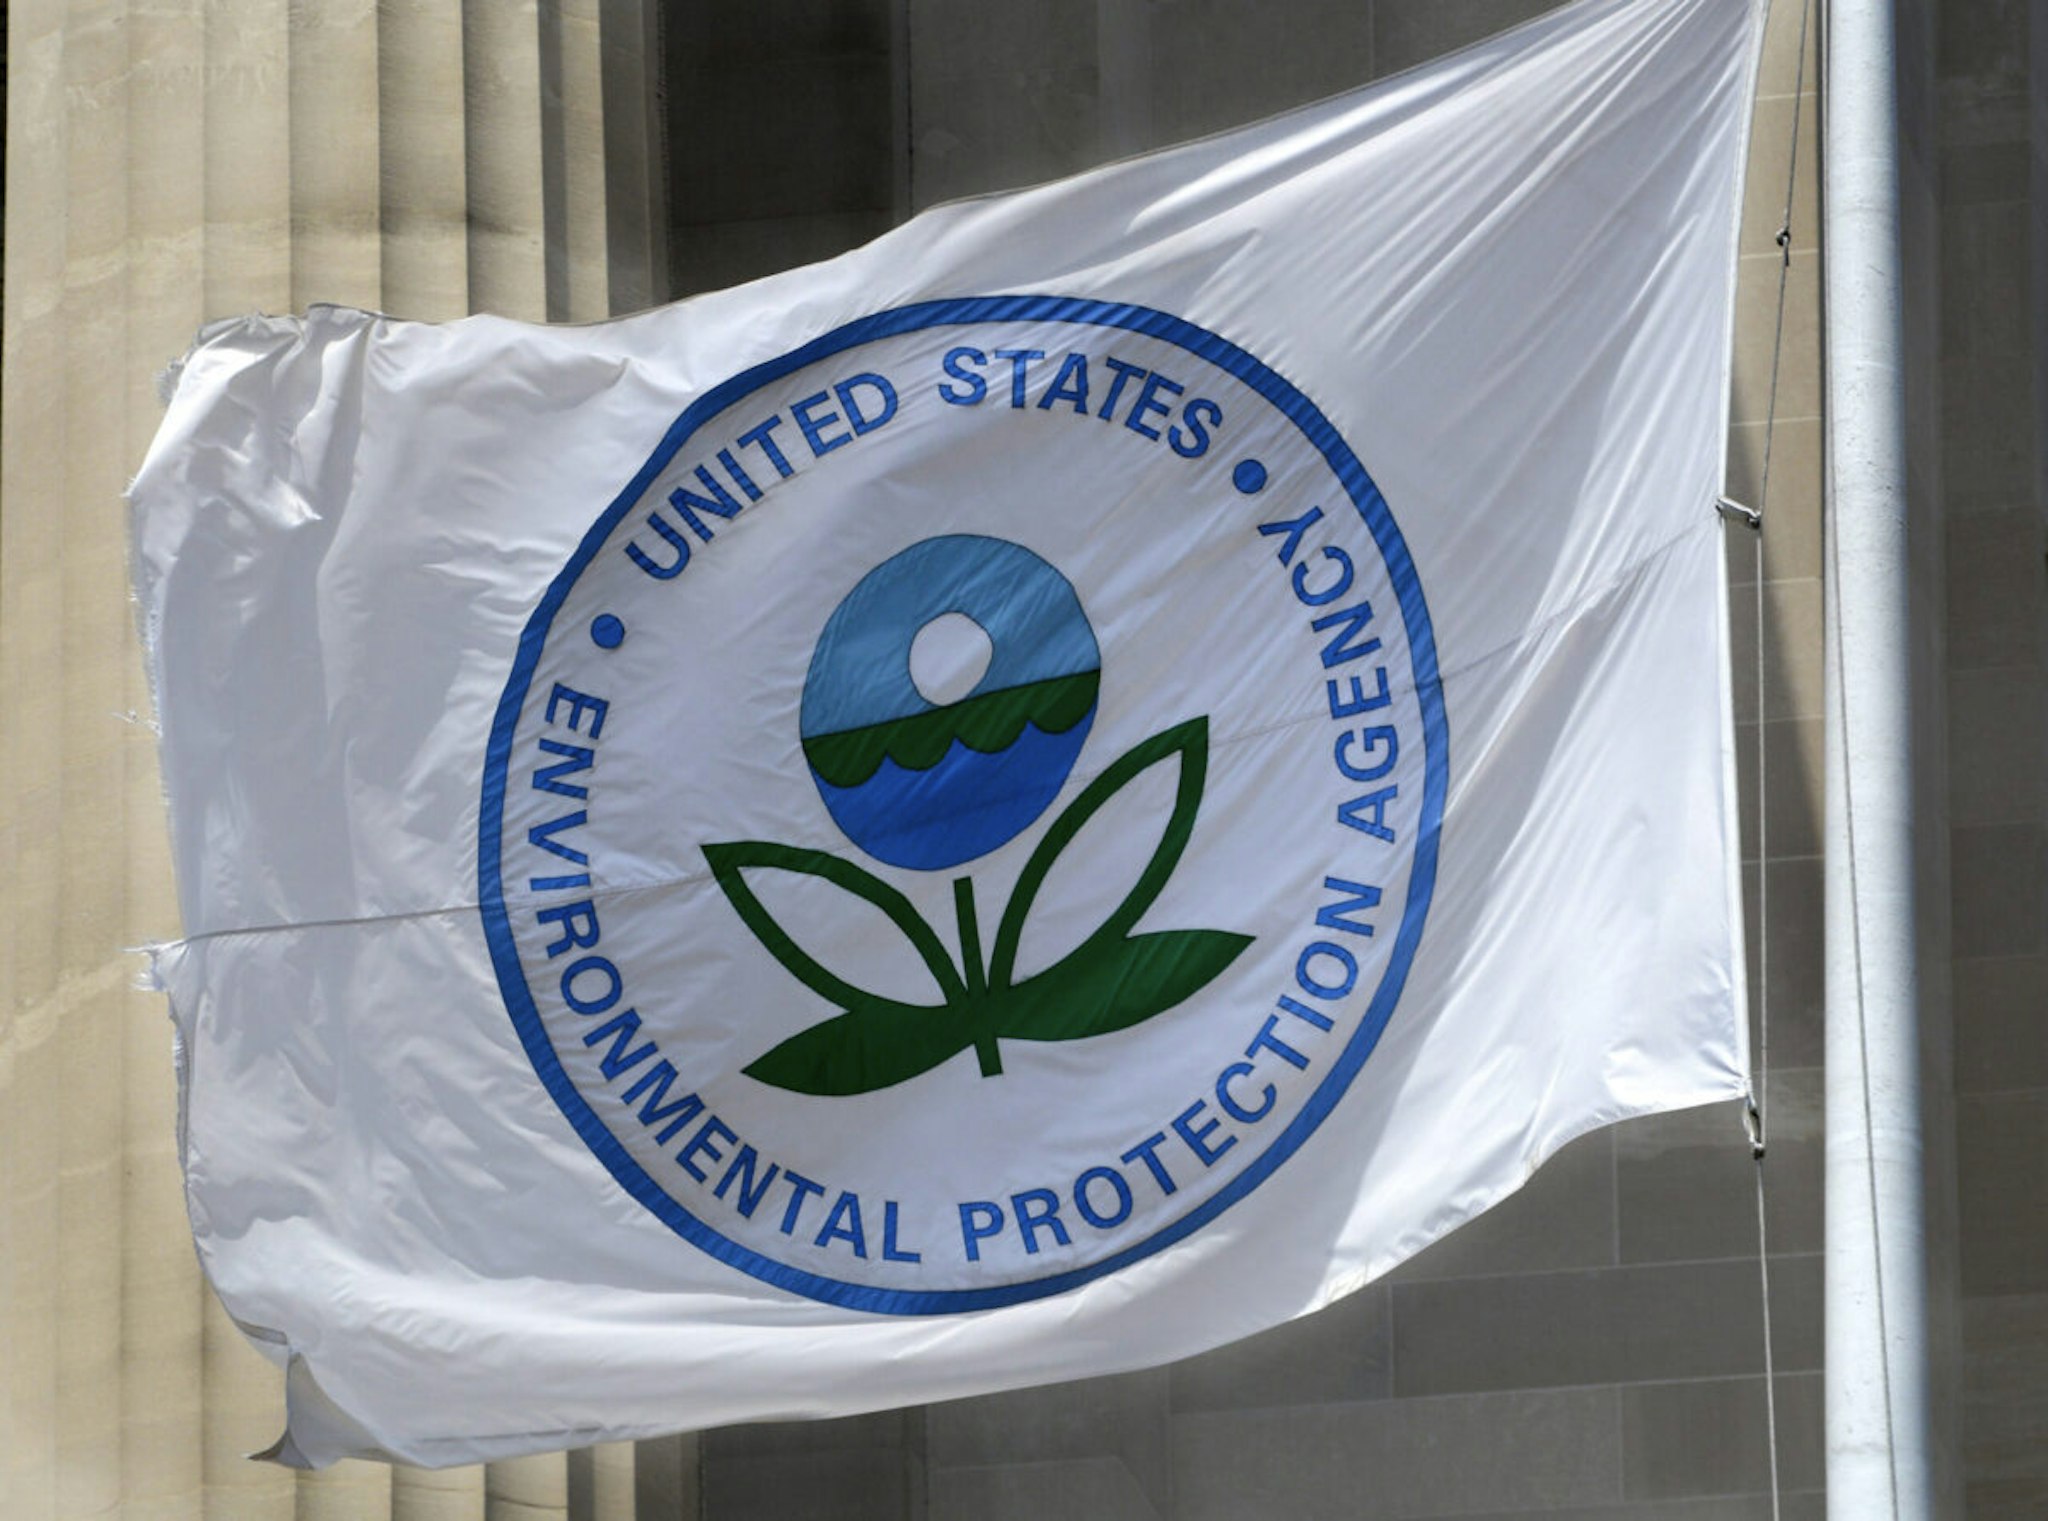 A flag with the United States Environmental Protection Agency (EPA) logo flies at the agency's headquarters in Washington, D.C.